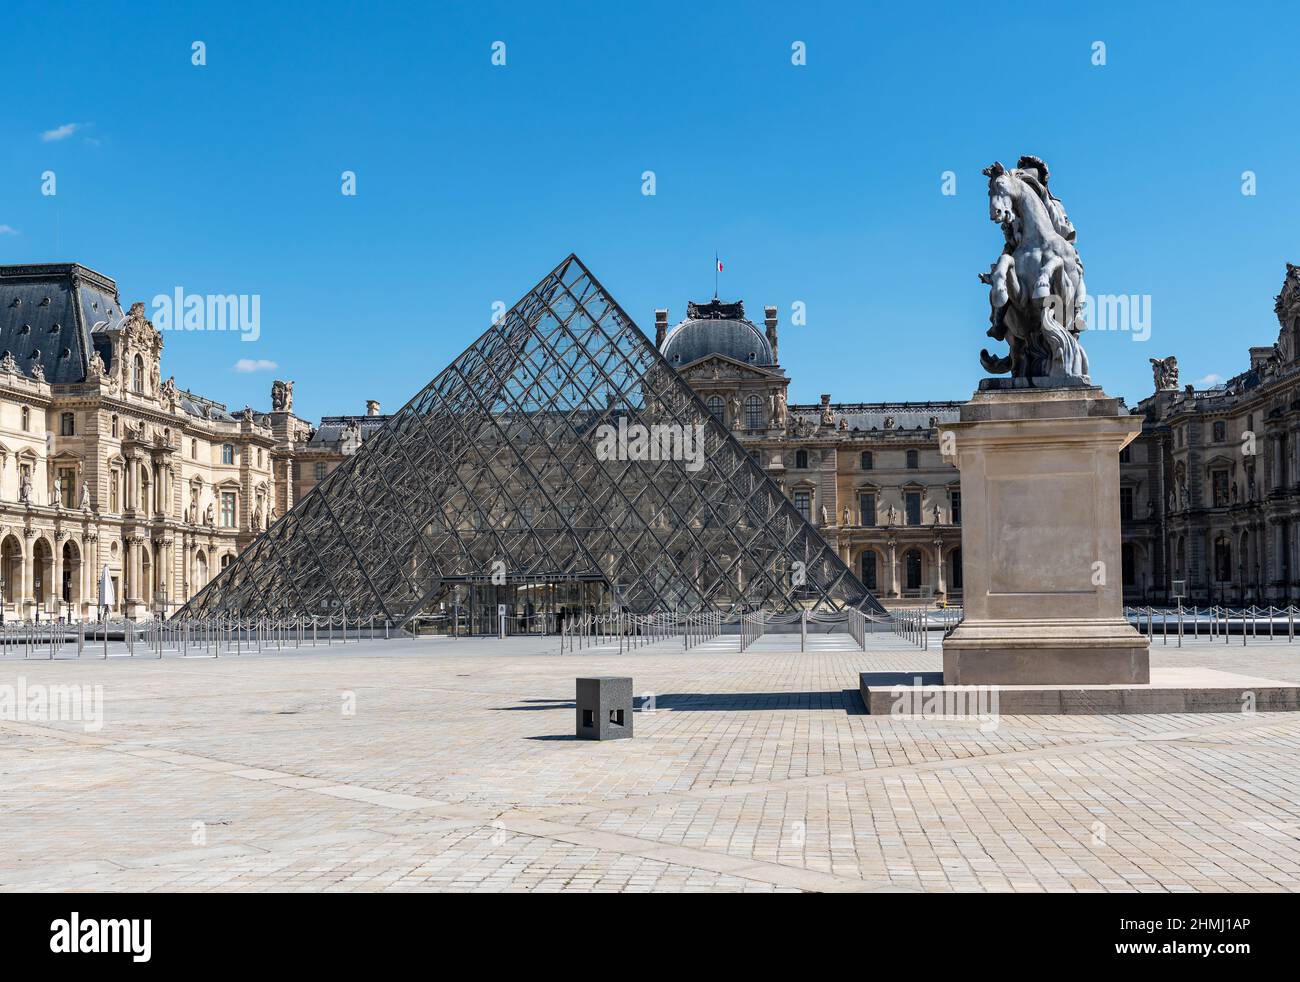 Deserted Musee du Louvre during Covid-19 pandemic lockdown - Paris Stock Photo